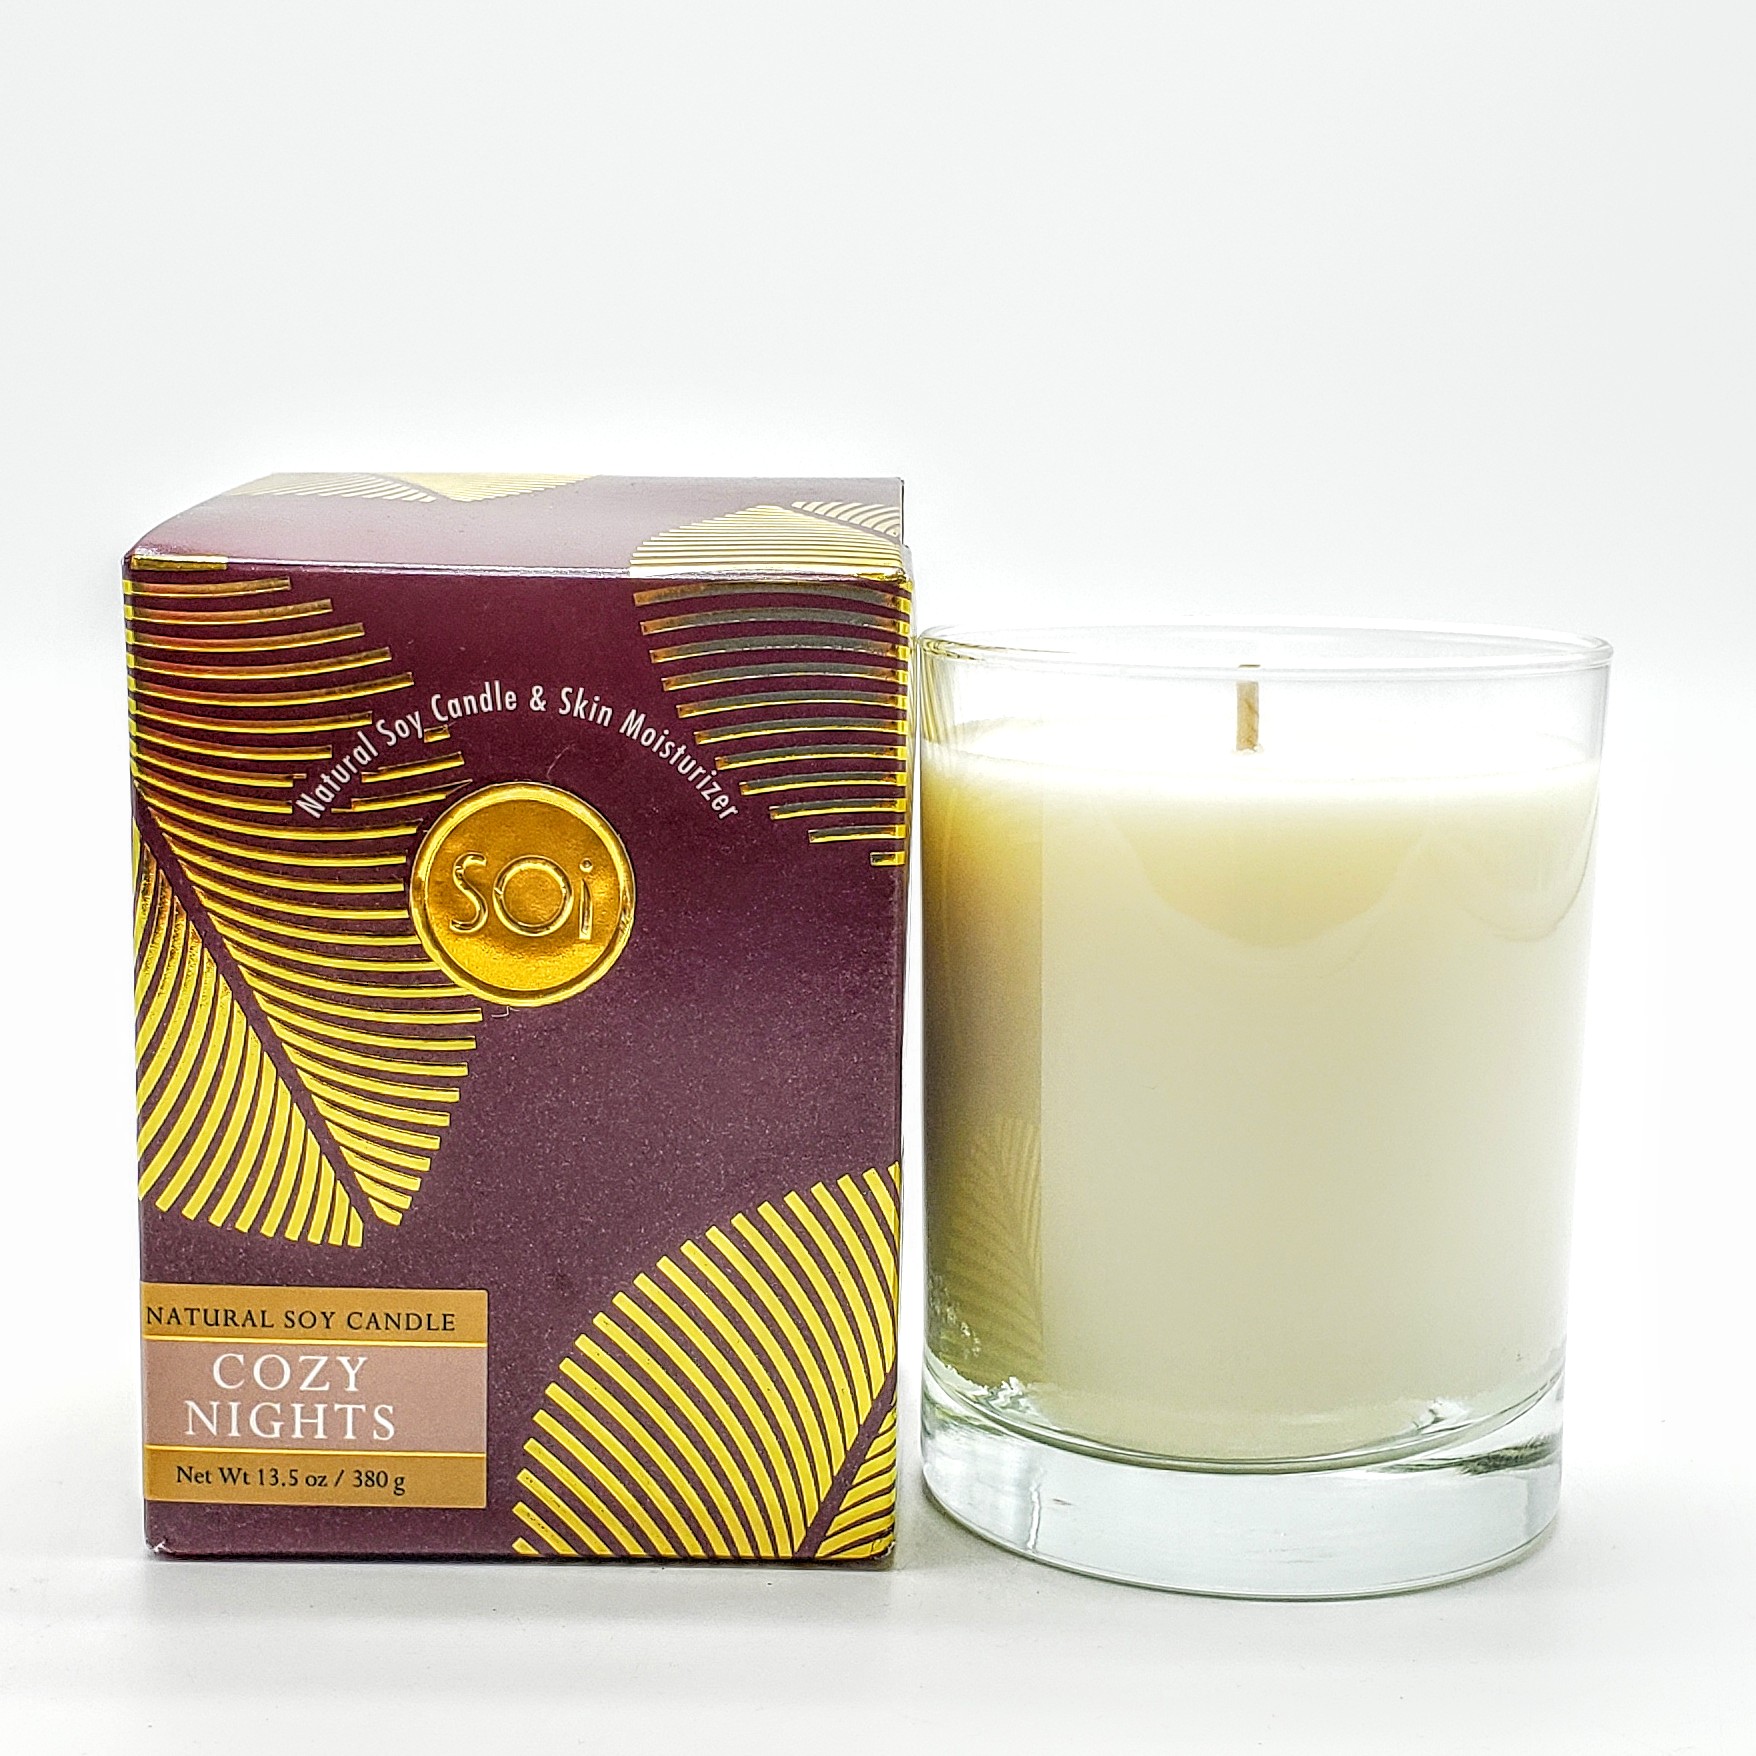 Soi Cozy Nights Scented Candle - Lotus Gallery